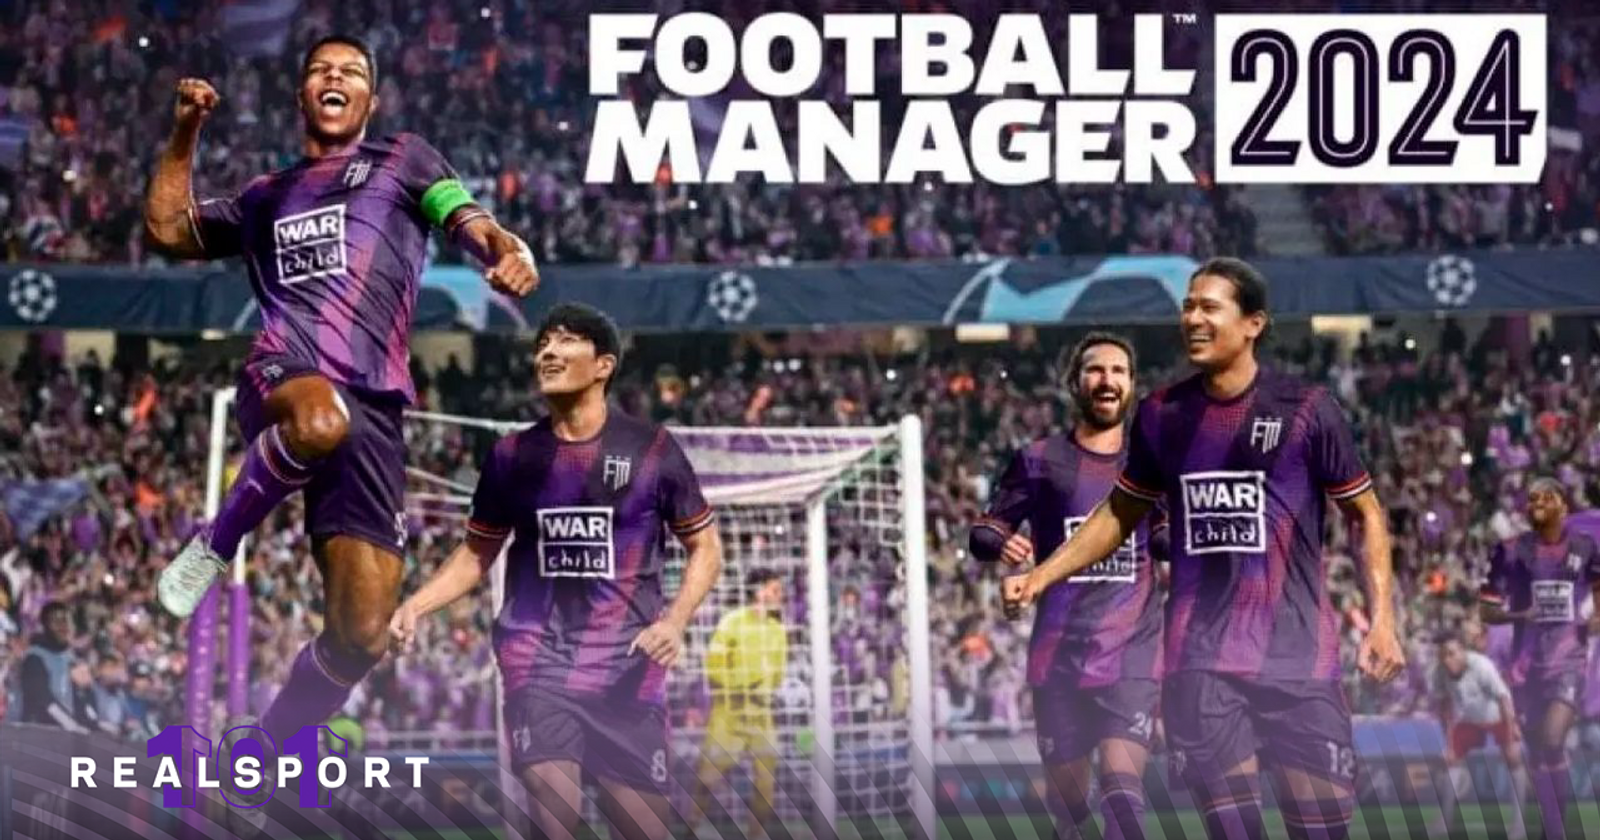 Football Manager 2024 free agents: best players you can hire without a fee  - Video Games on Sports Illustrated